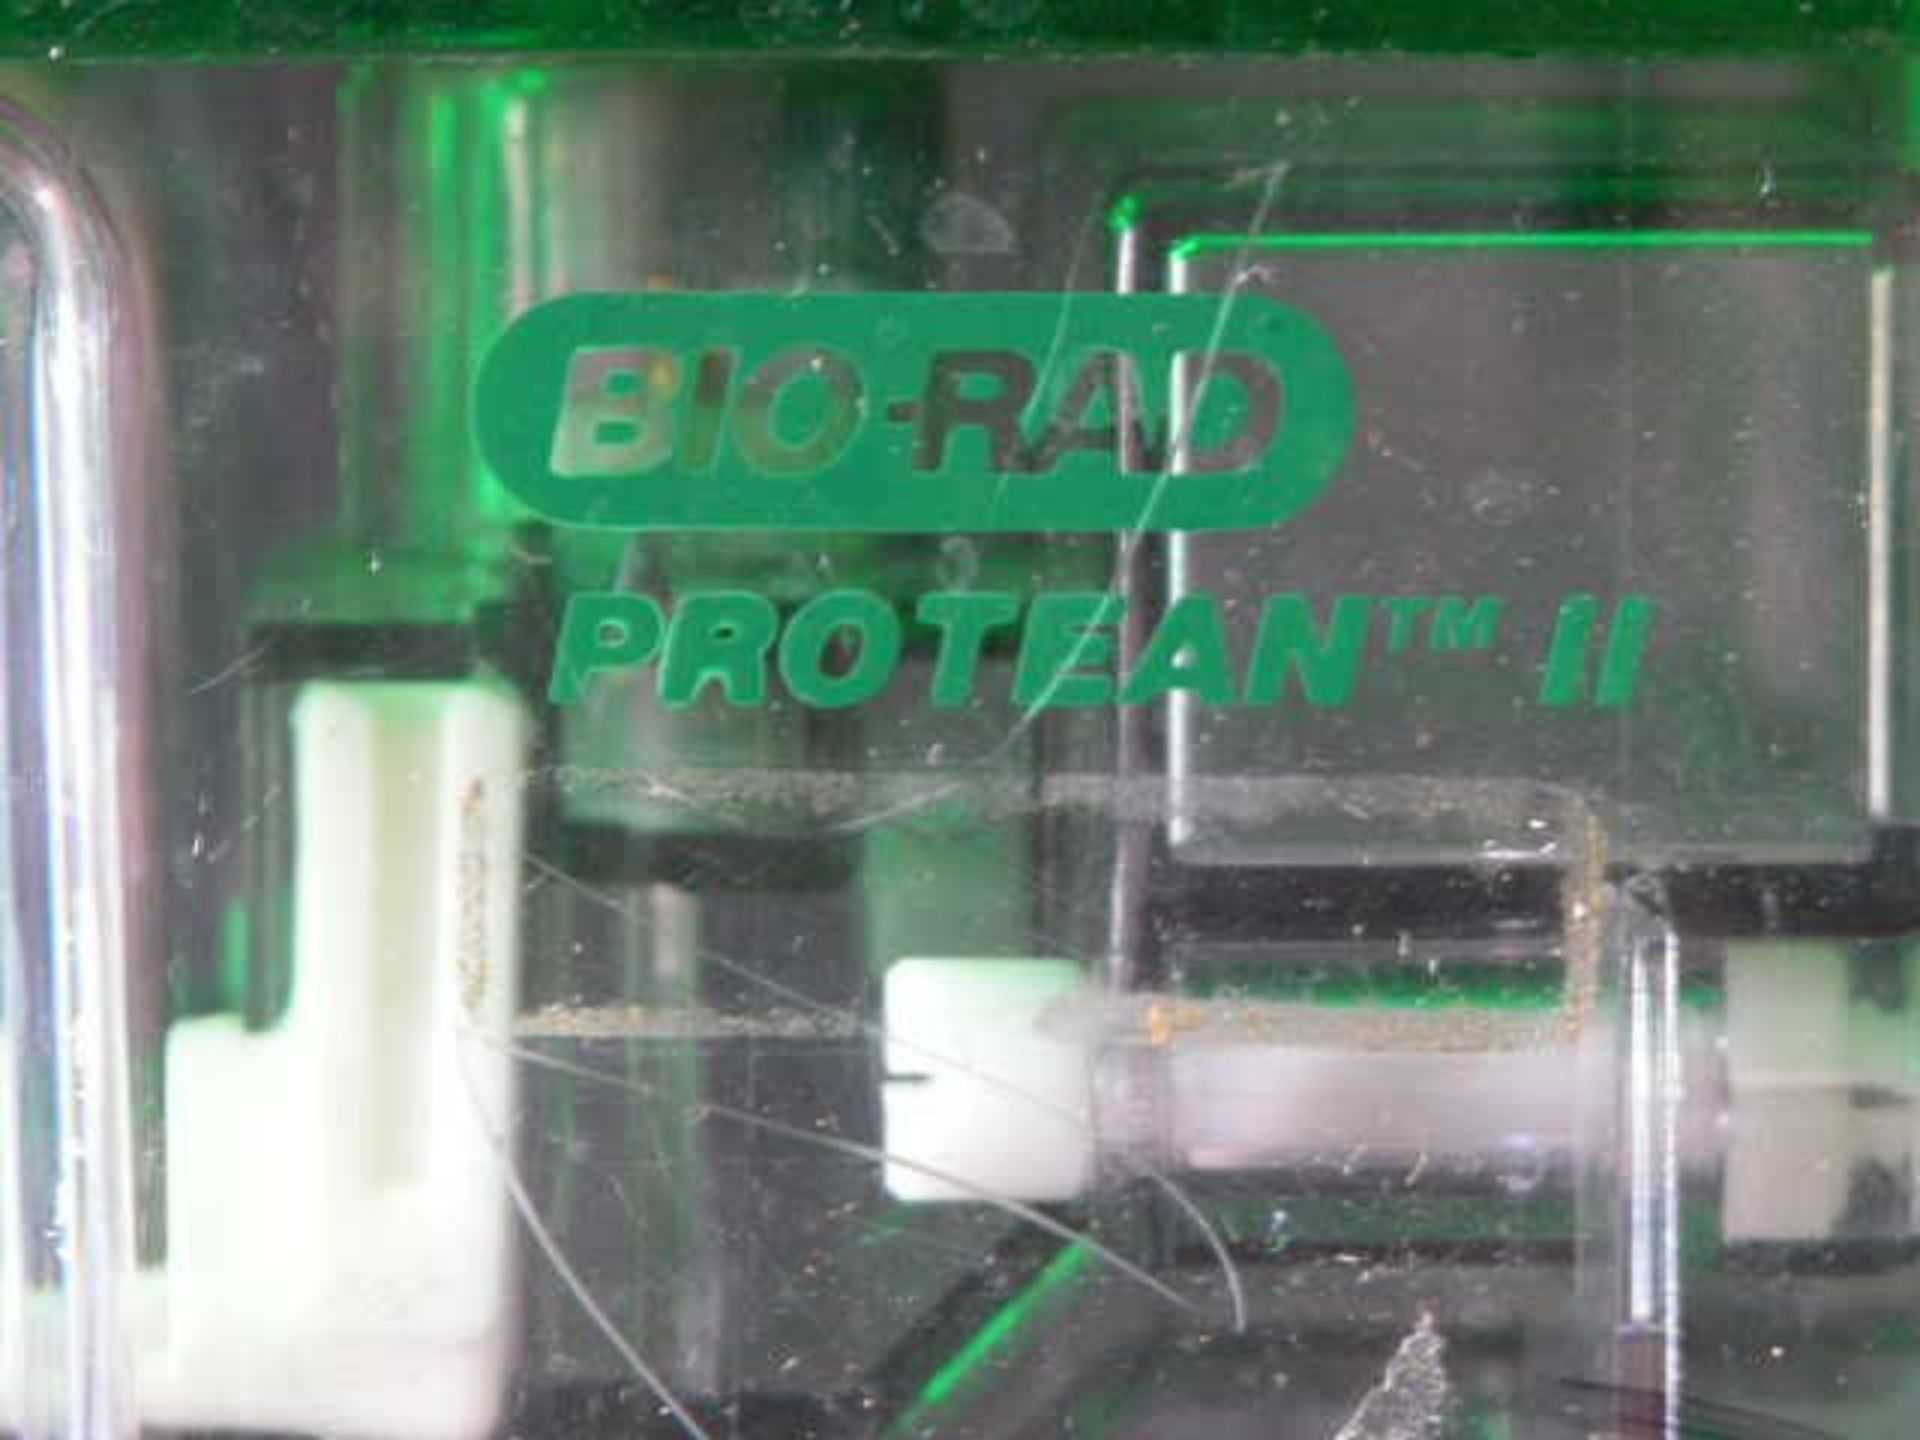 BIO RAD Protean II Cell, Electrophoresis Cell, Qty 1, 221018247745 - Image 2 of 3